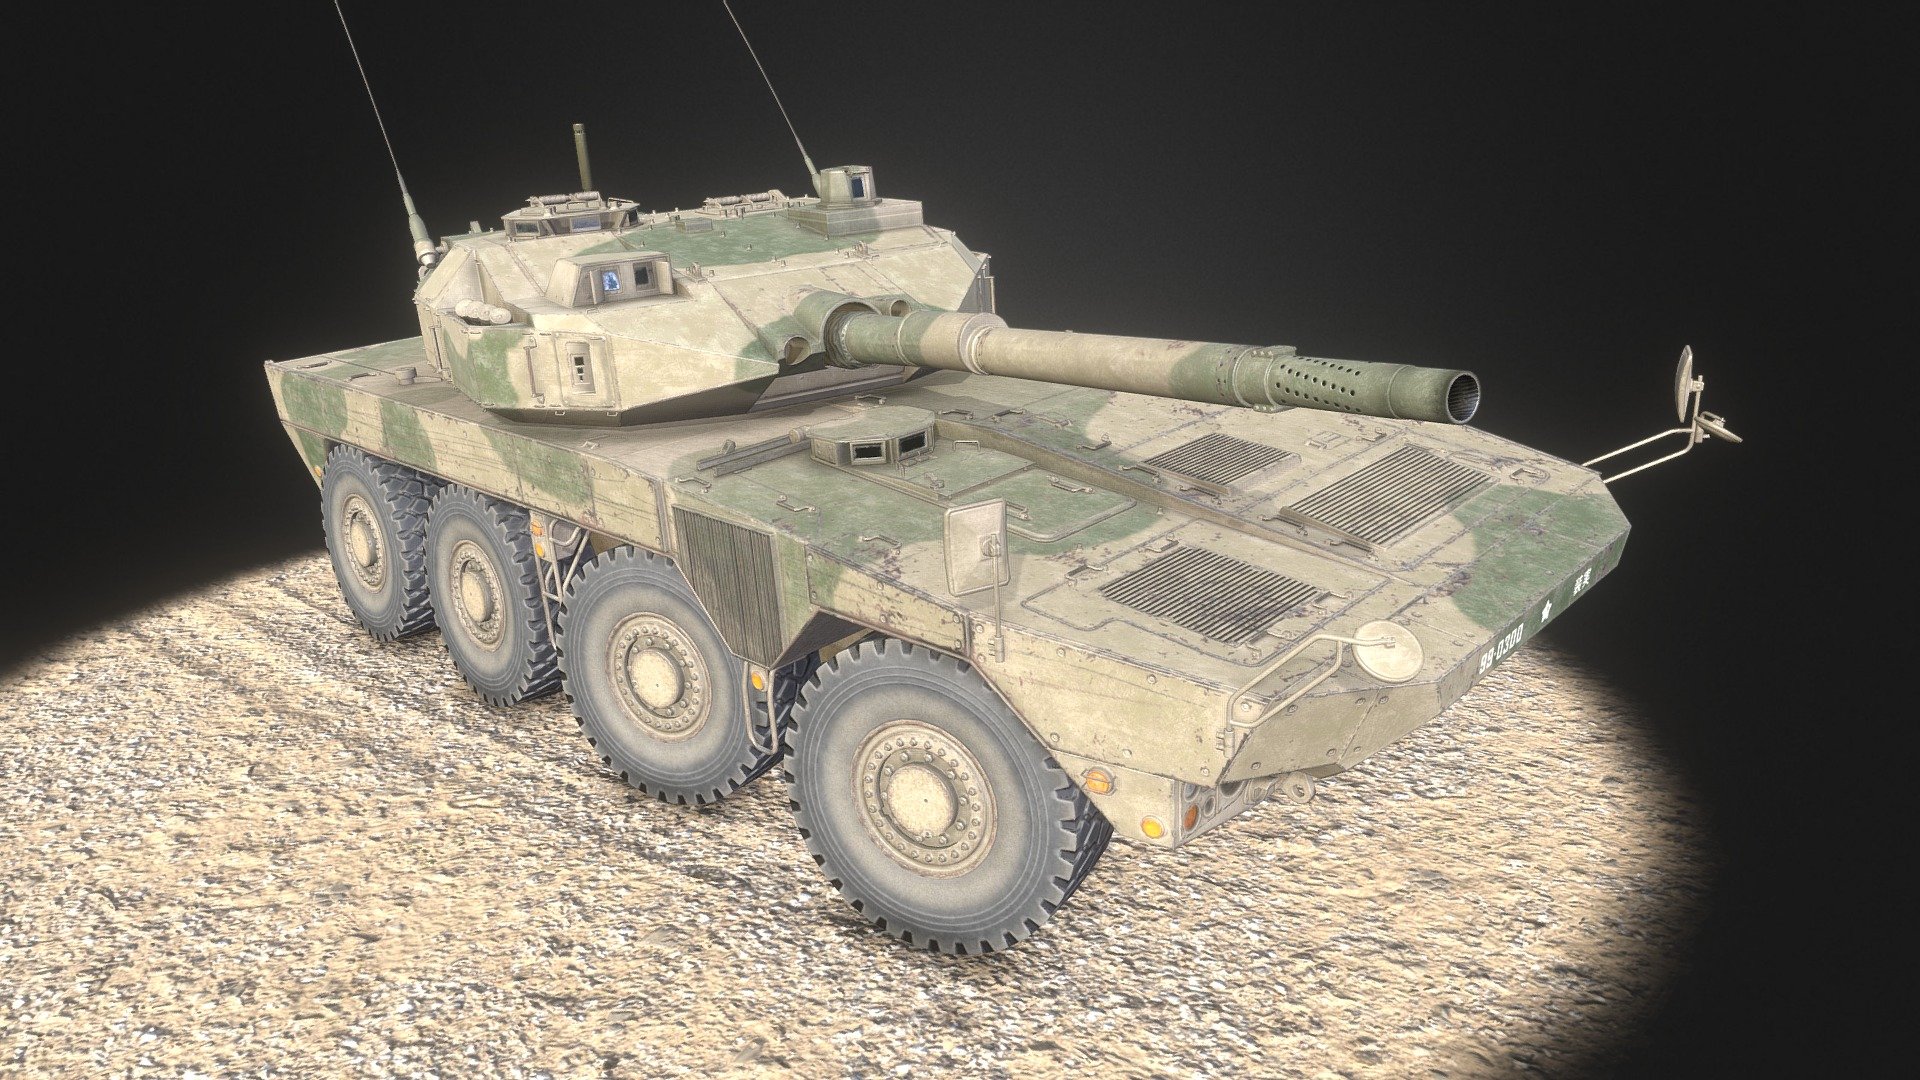 available in assetstore/cgtrayder
1. The Type 16 Maneuver Combat Vehicle (16式機動戦闘車 Hitoroku-shiki kidou-sentou-sha) is a wheeled tank destroyer of the Japan Ground Self-Defense Force. 
2. This model I did in my spare time giving 3.5 hours in the evening. As a result, it turned out 185 hours. At this time included - lowpoly, hipoly, mapping and baking maps. Also add 20 hours left for coloring the model 3d model